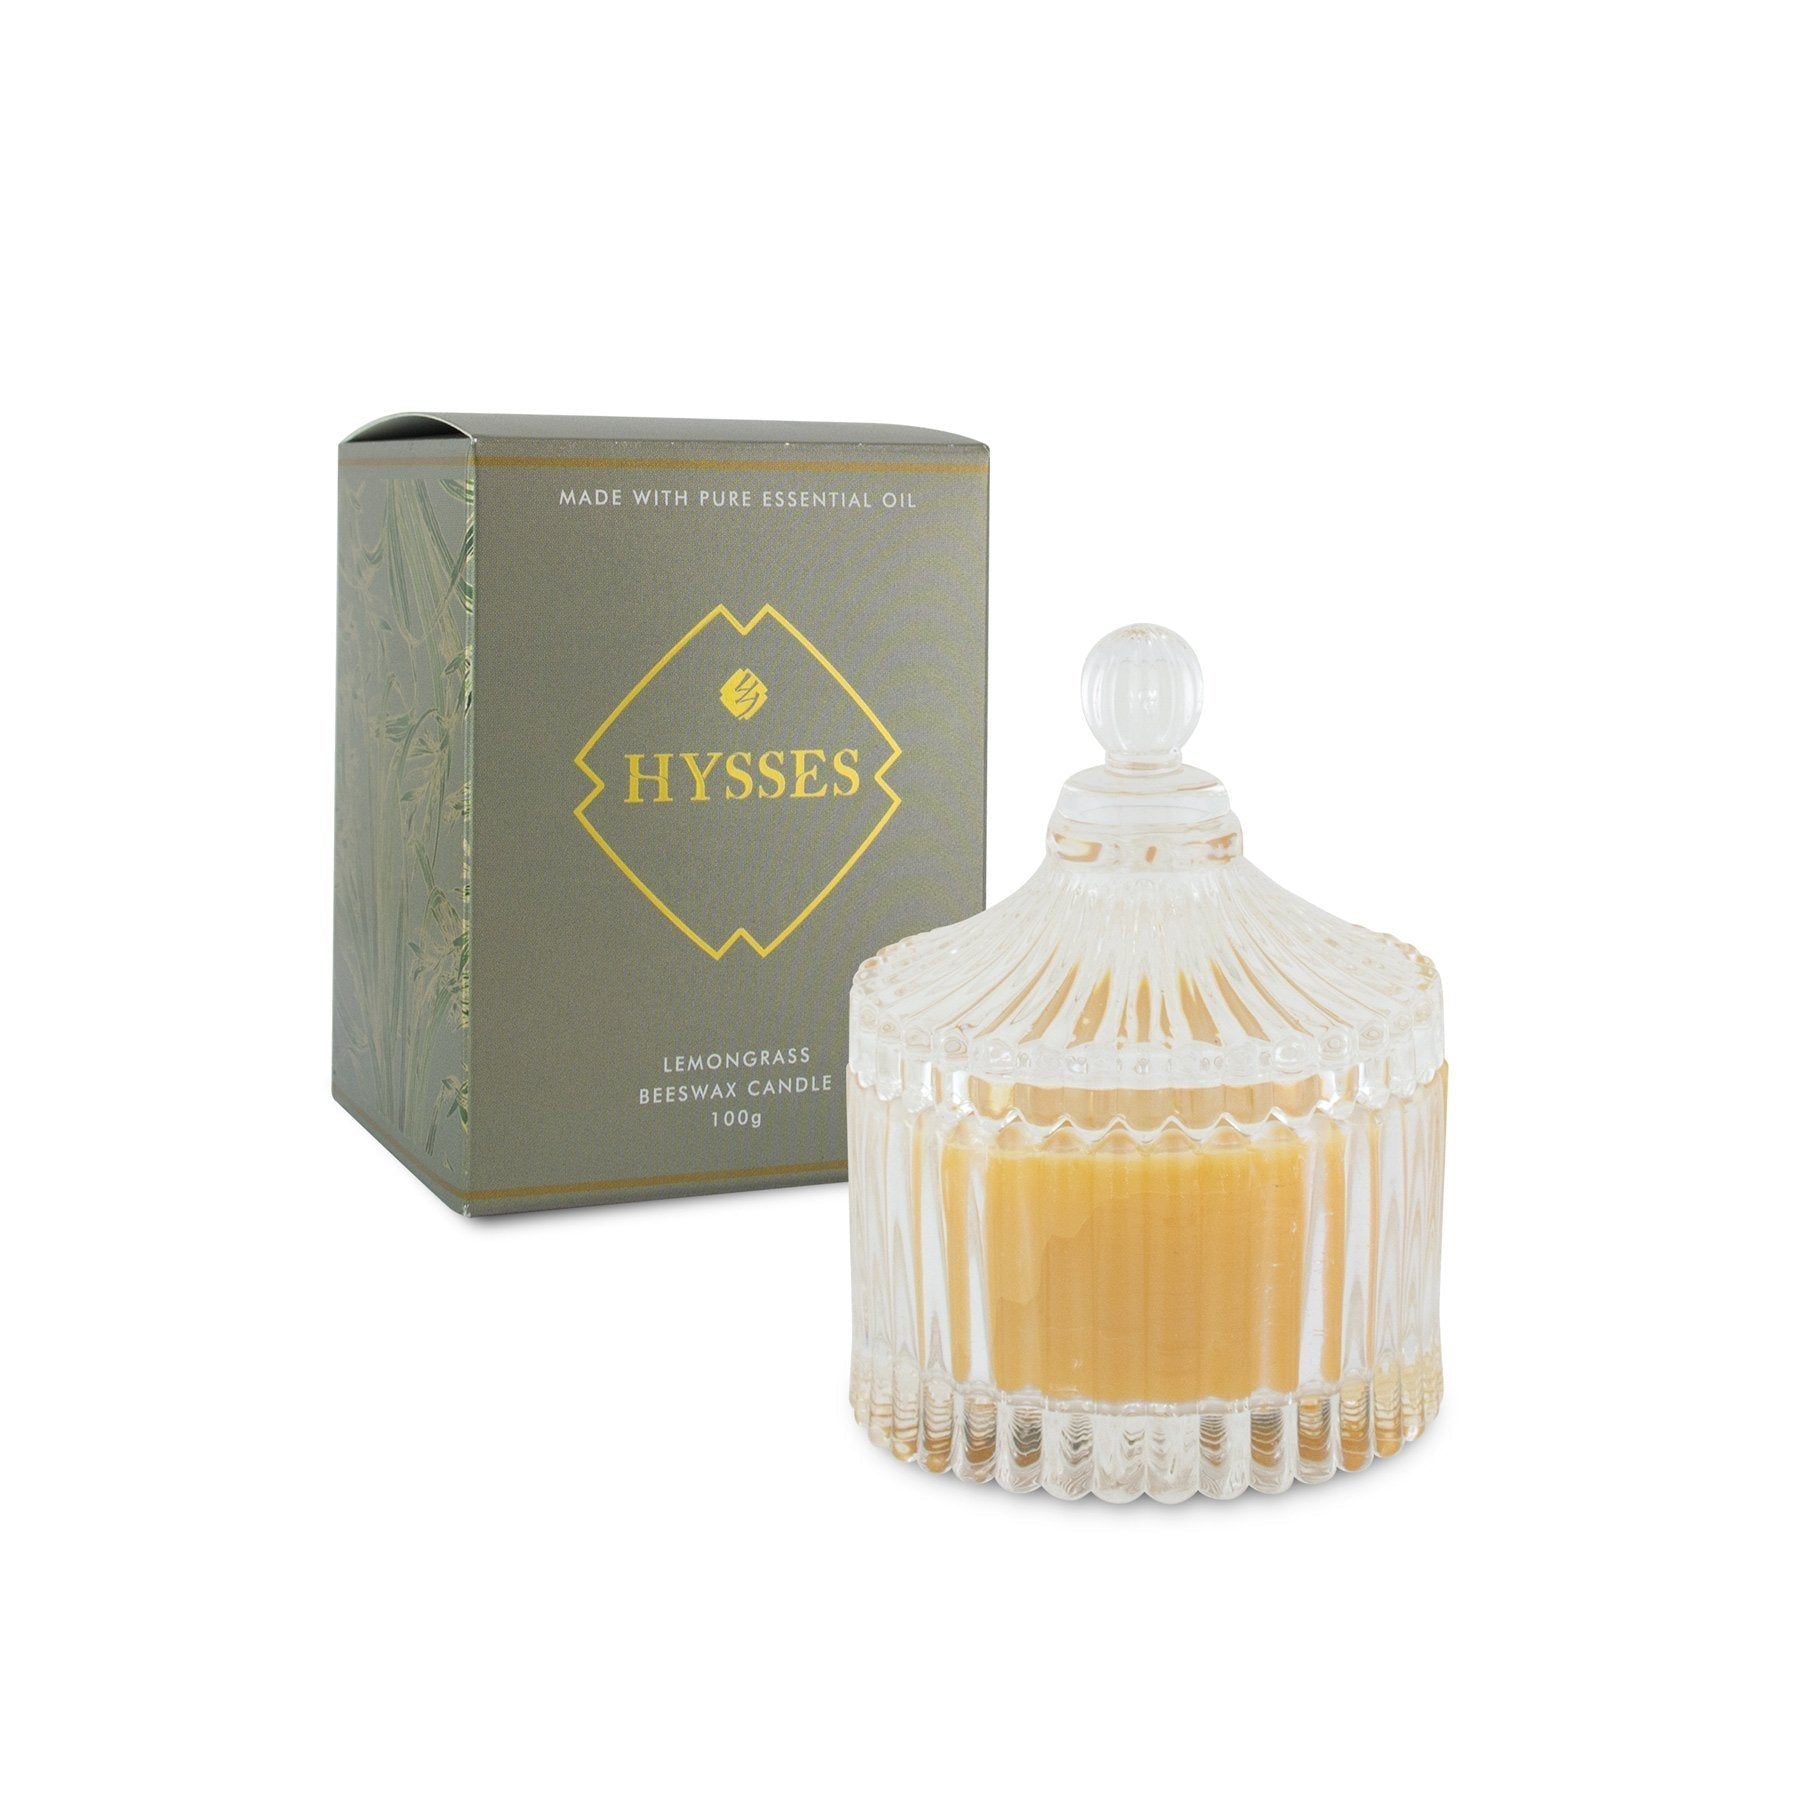 Hysses Home Scents 100g Beeswax Candle Lemongrass